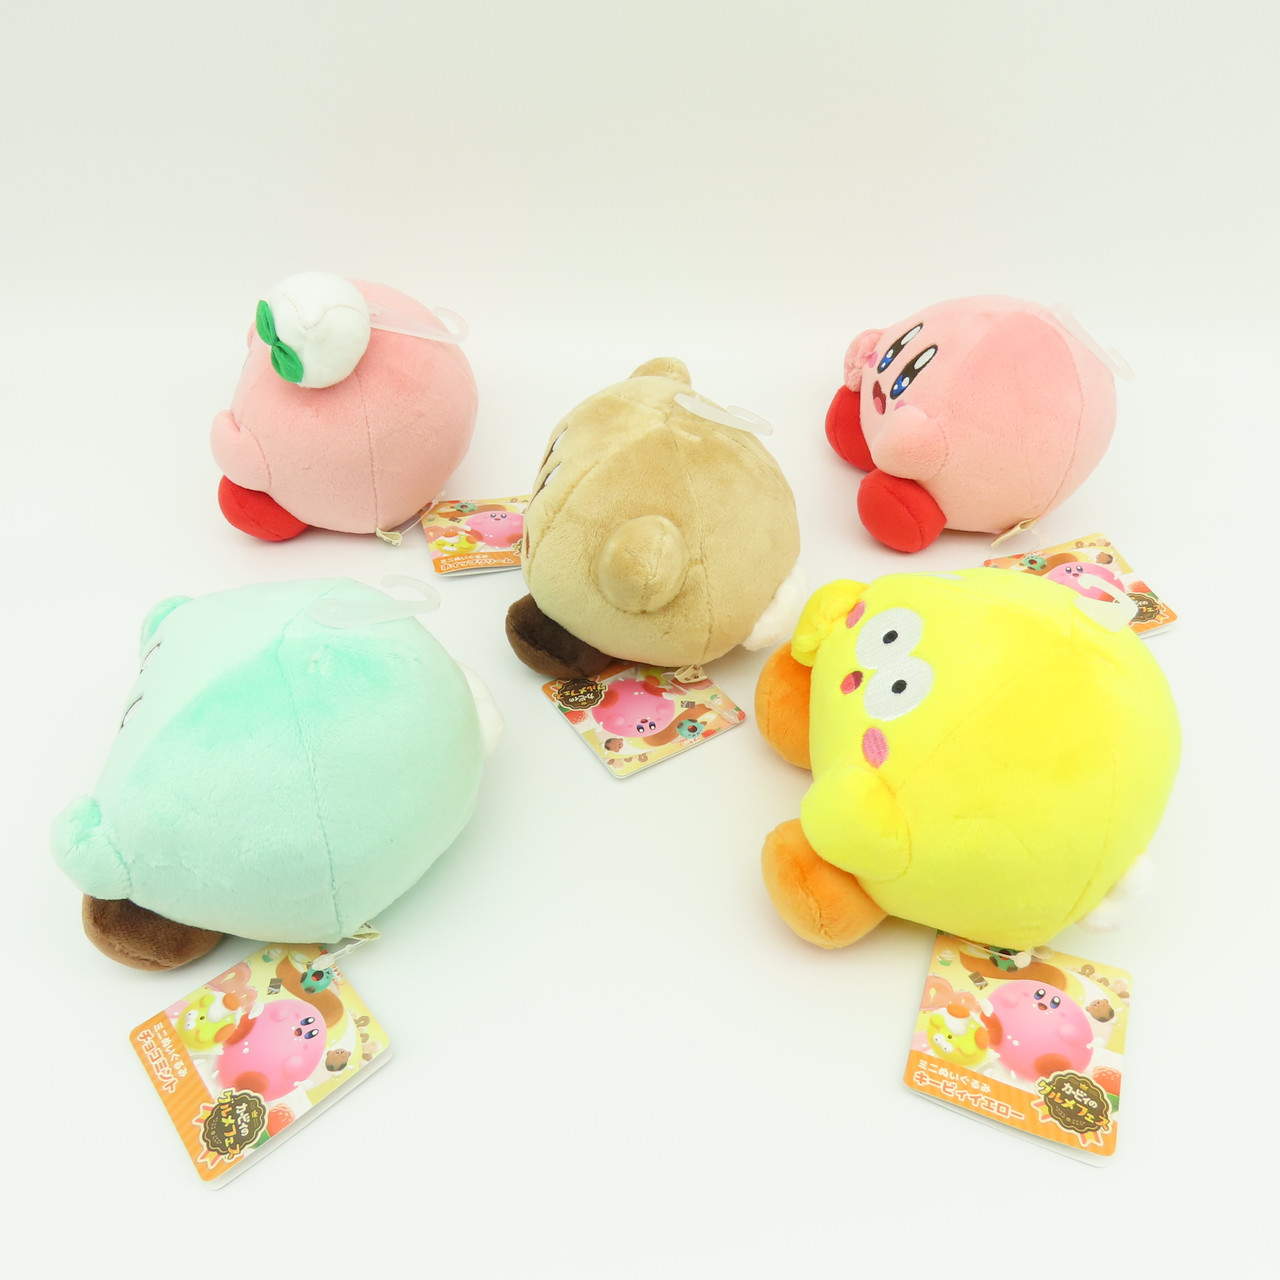 Kirby's Dream Buffet Plushies Announced In Japan, Now Up For Pre-Order –  NintendoSoup